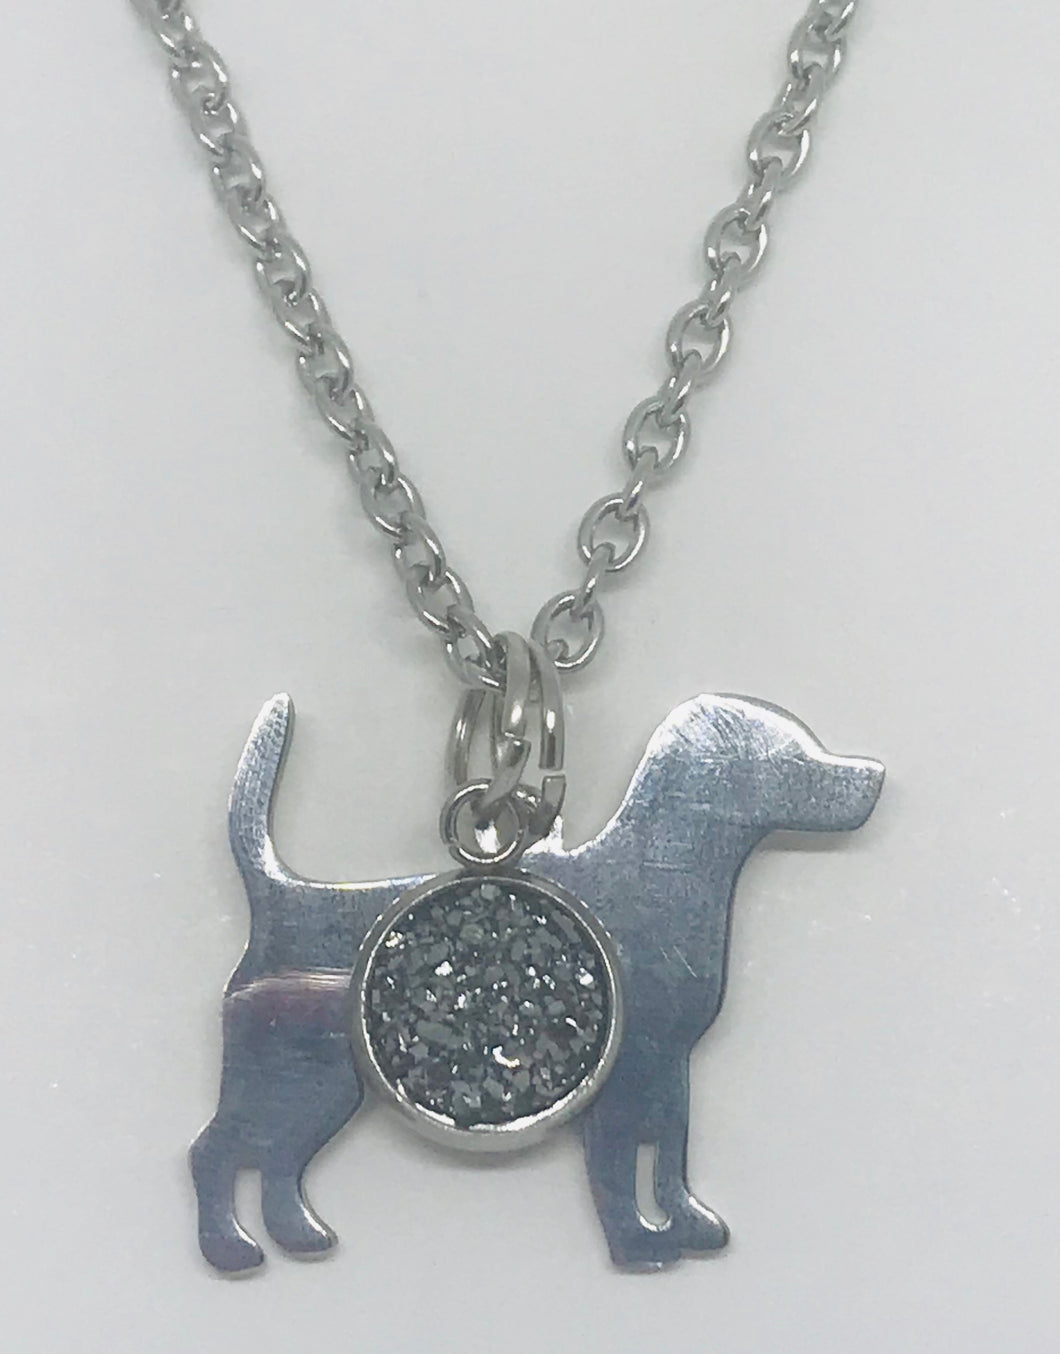 Standing Dog Necklace (Stainless Steel)